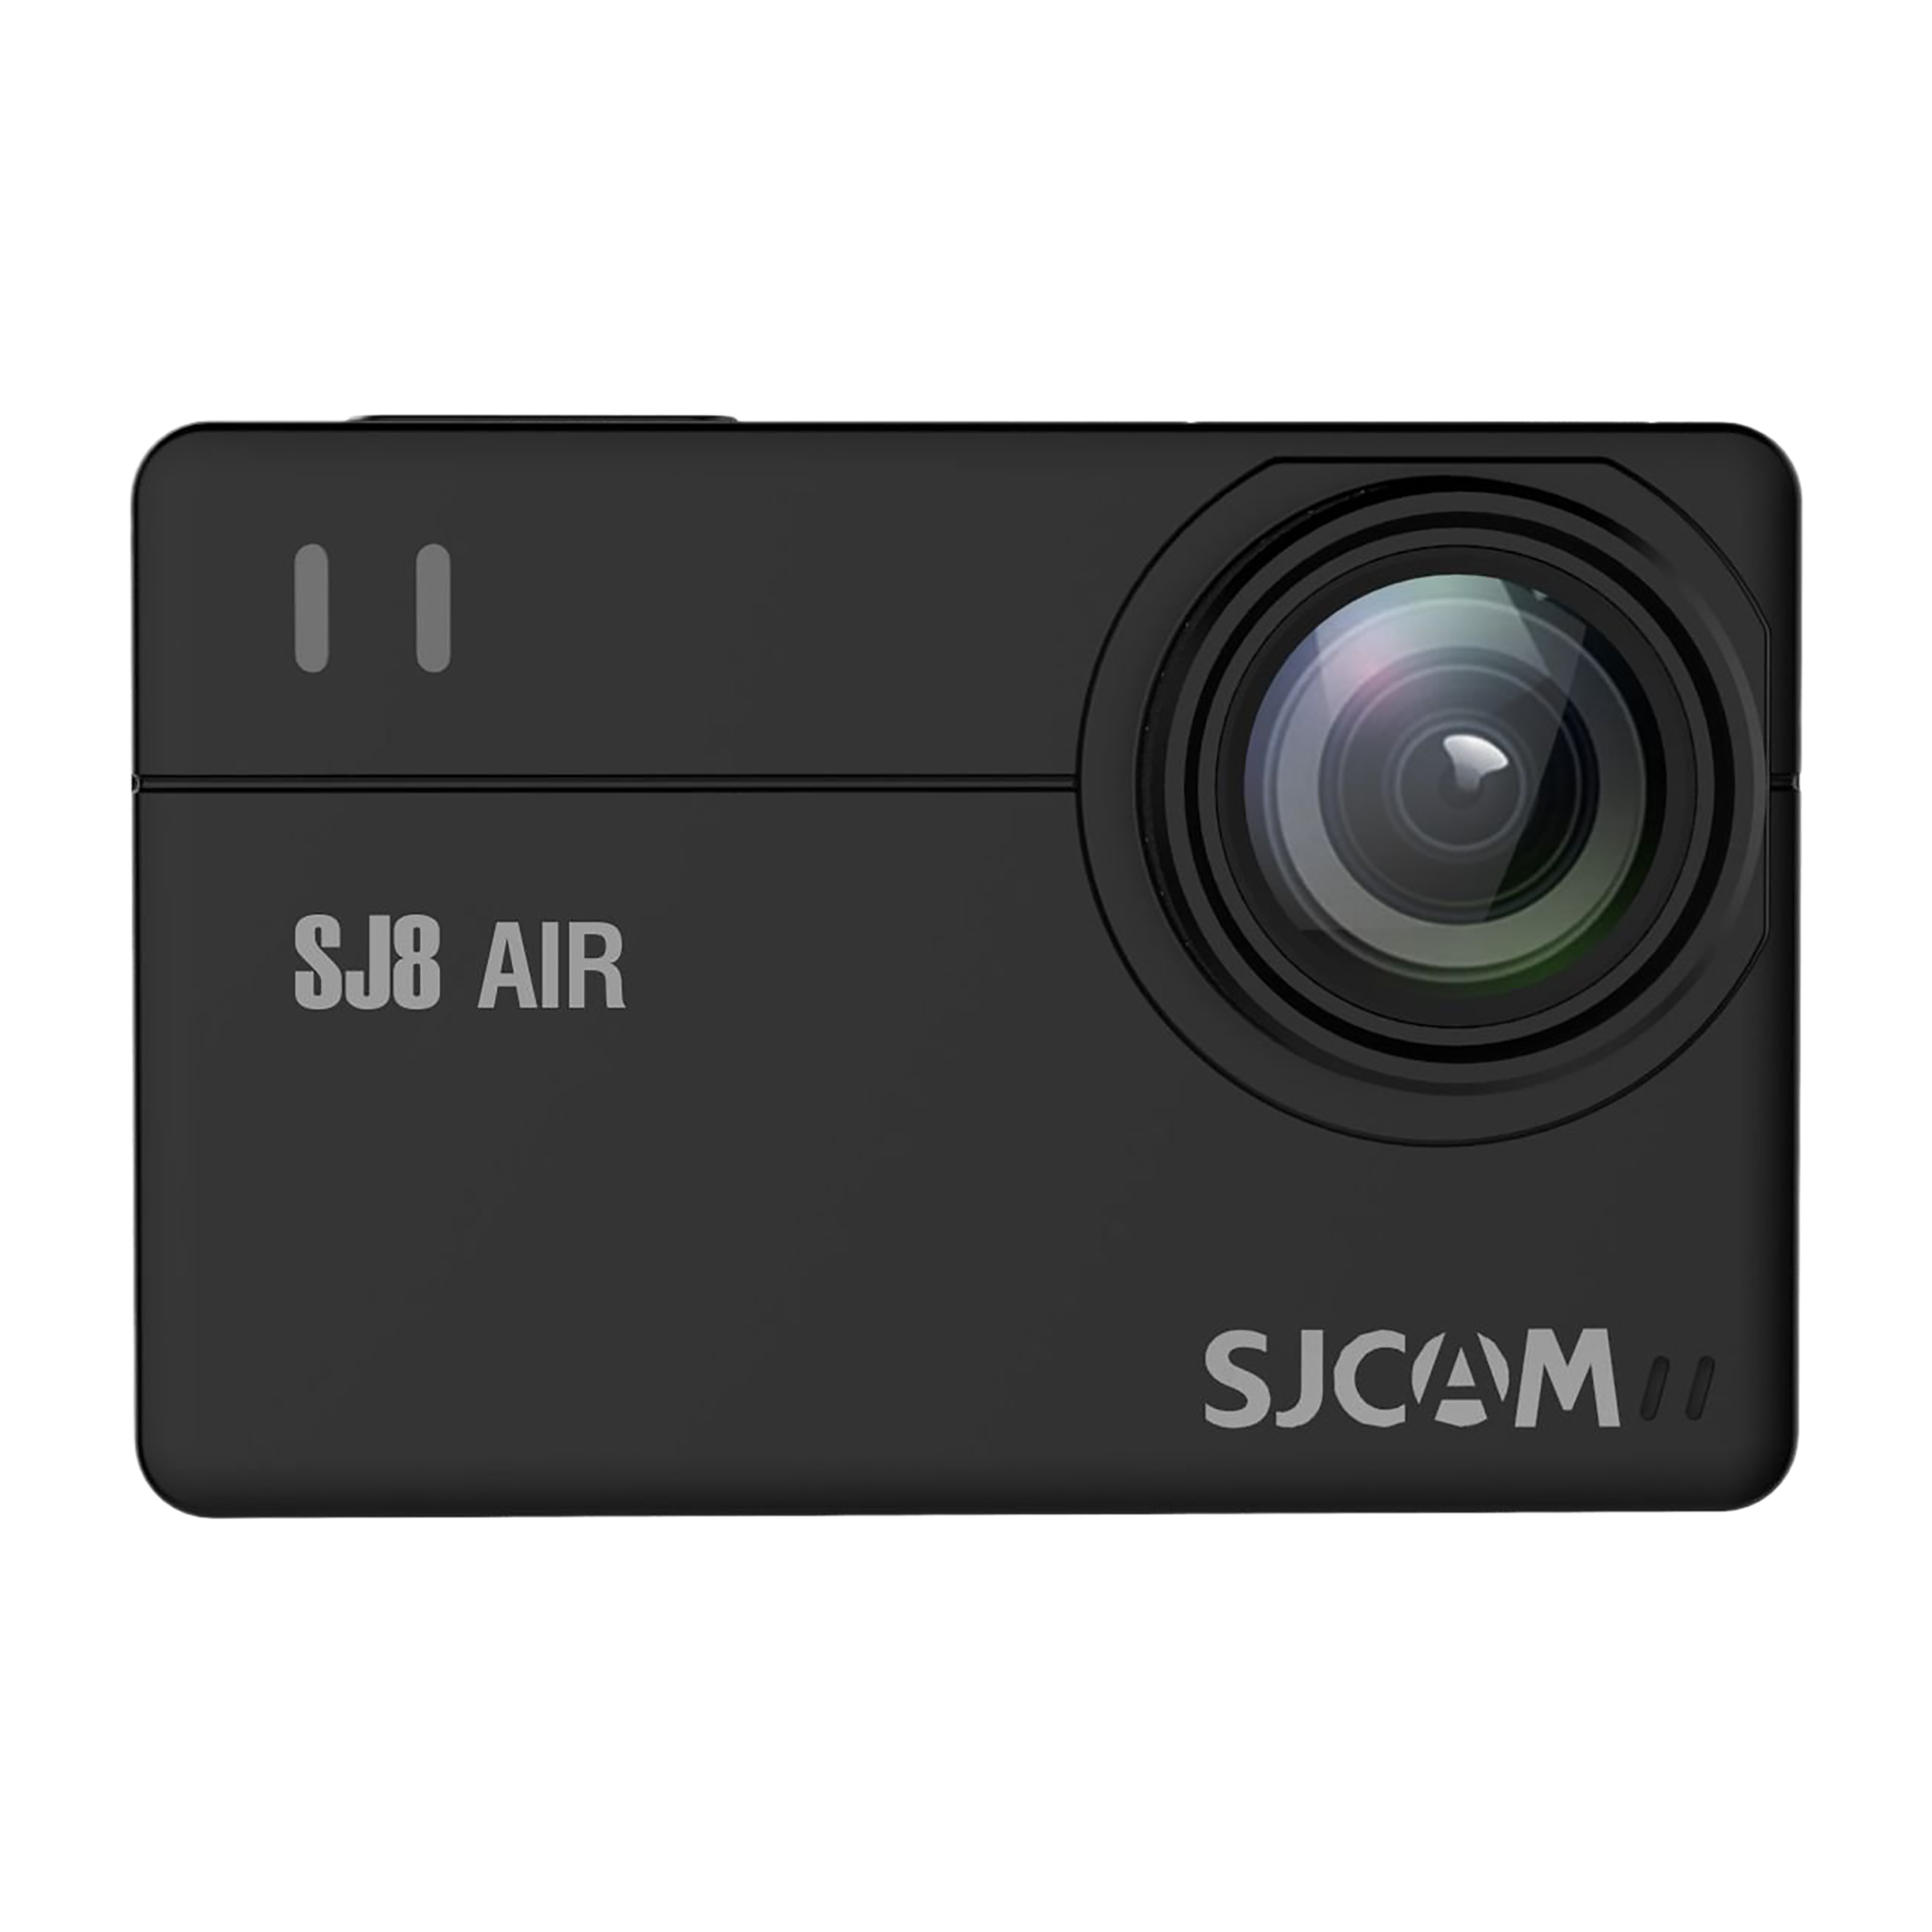 SJCAM SJ8 Air 1296P and 14.24MP 30 FPS Waterproof Action Camera with 170 Degree Wide Angle (Black)